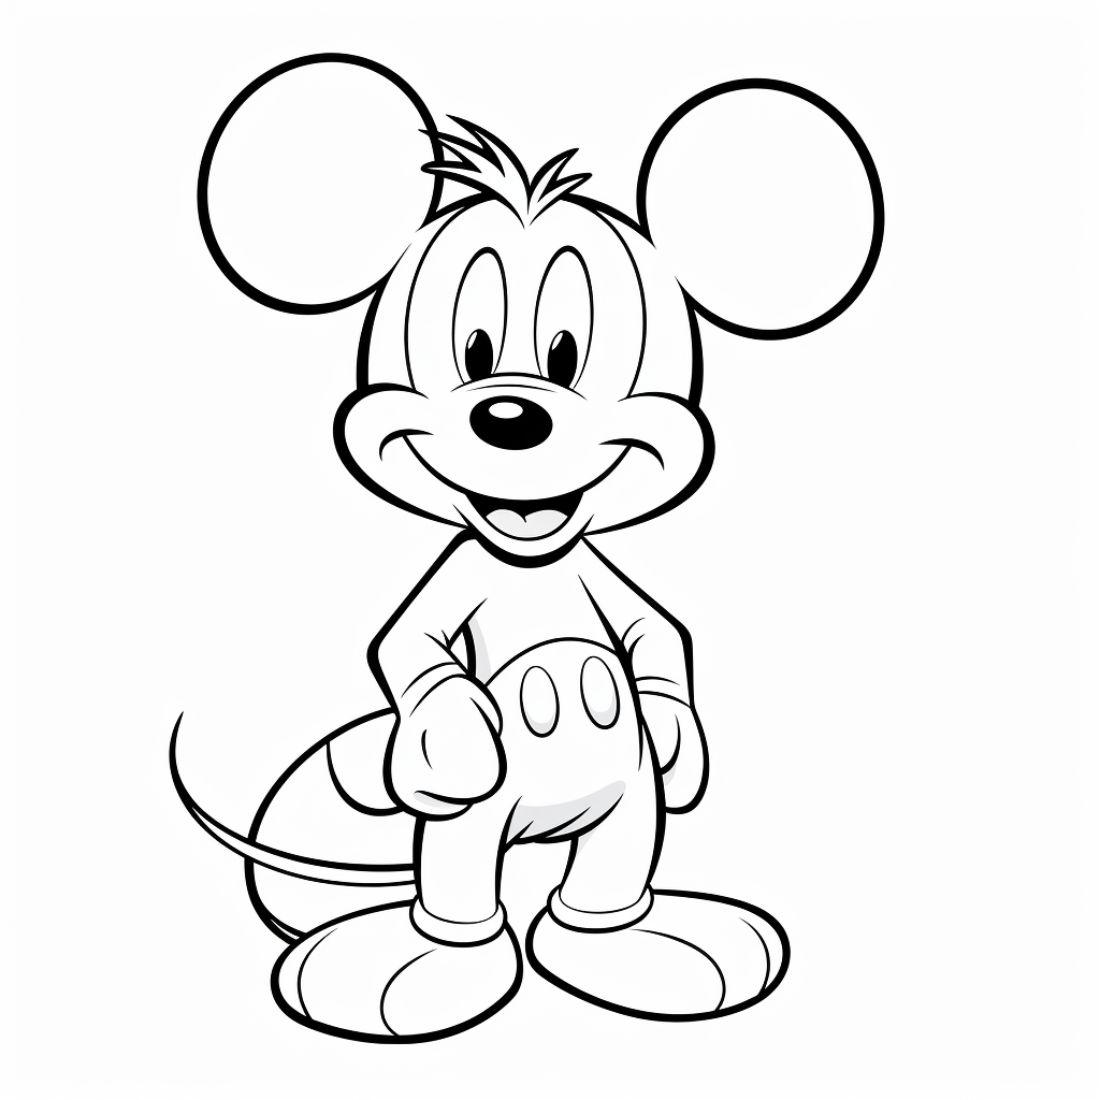 Mickey mouse coloring pages preview image.